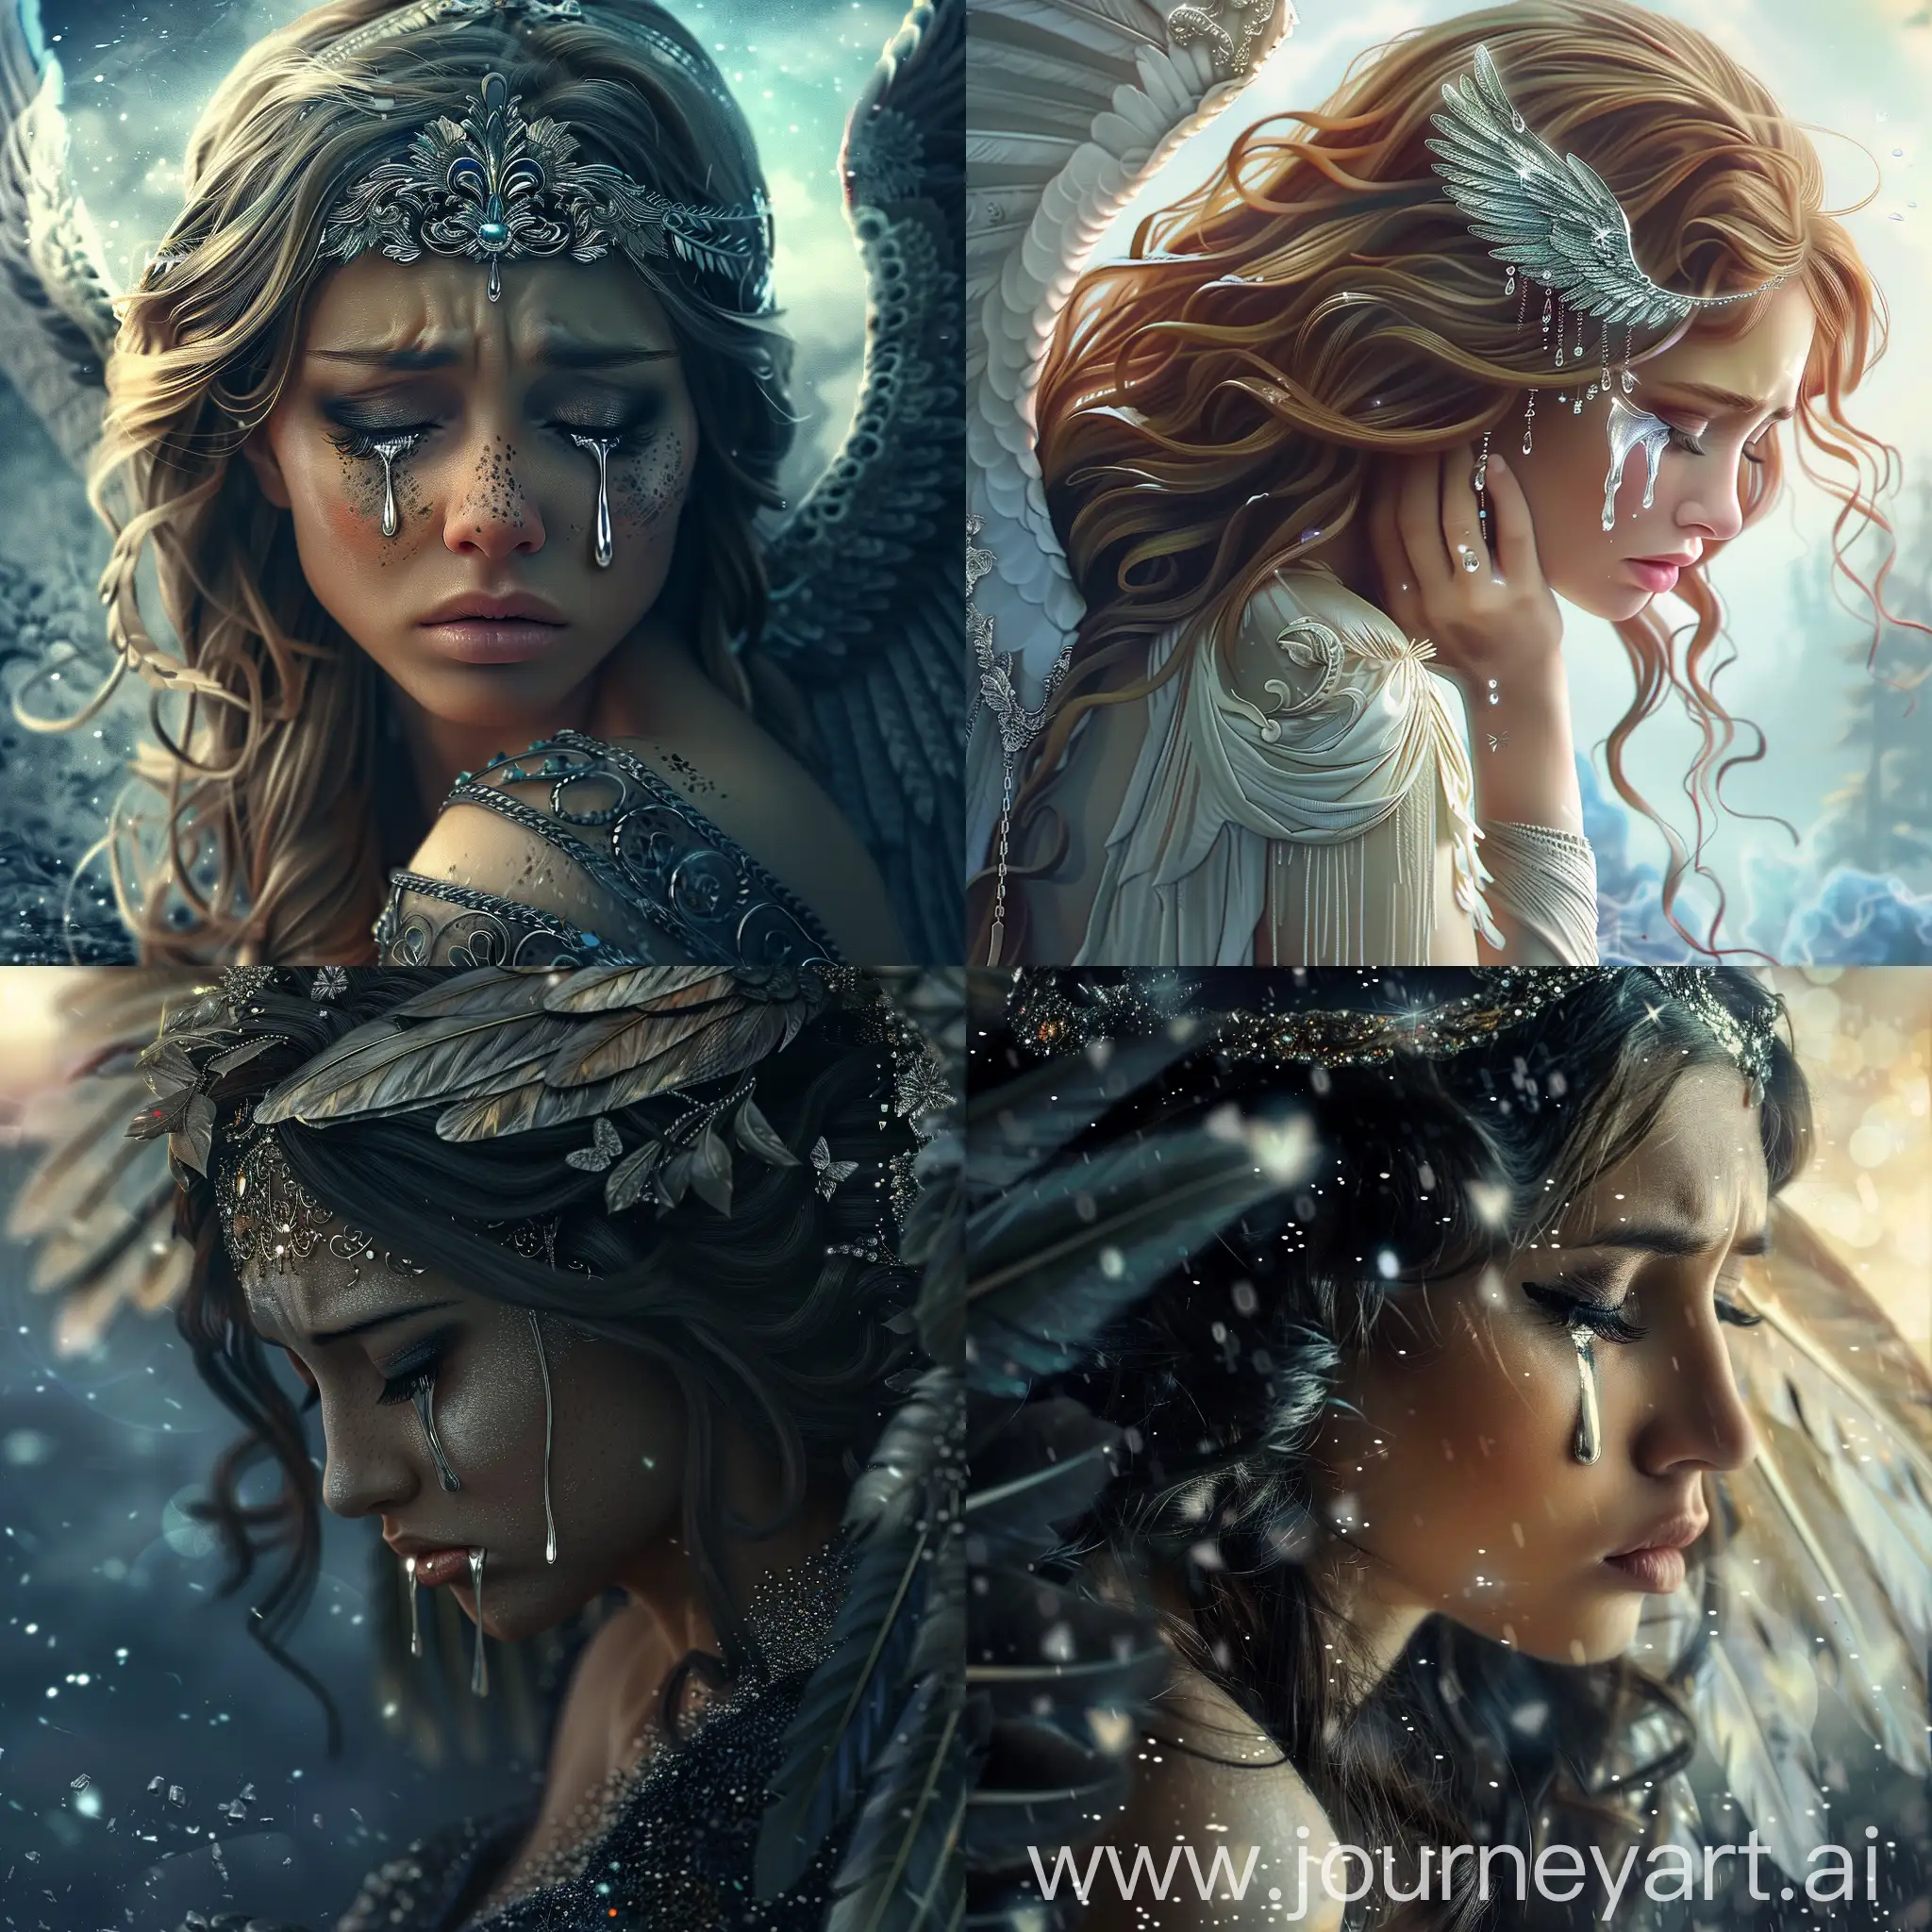 Surreal-Depiction-of-a-Tearful-Angel-with-Silver-Tears